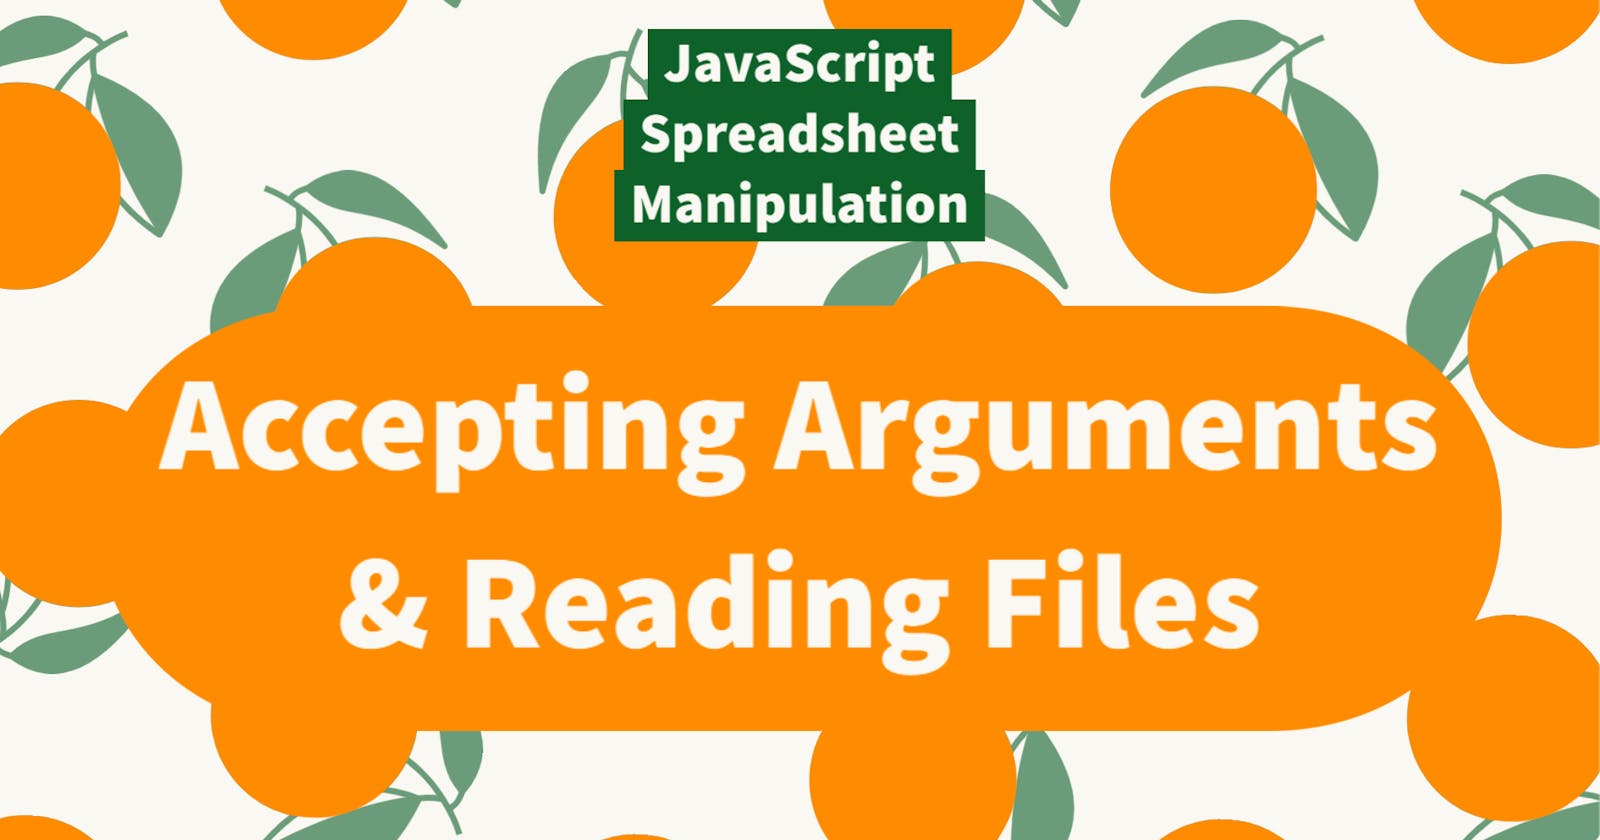 Using JavaScript to Work with Spreadsheets, Part 3: Accepting Arguments & Reading Files